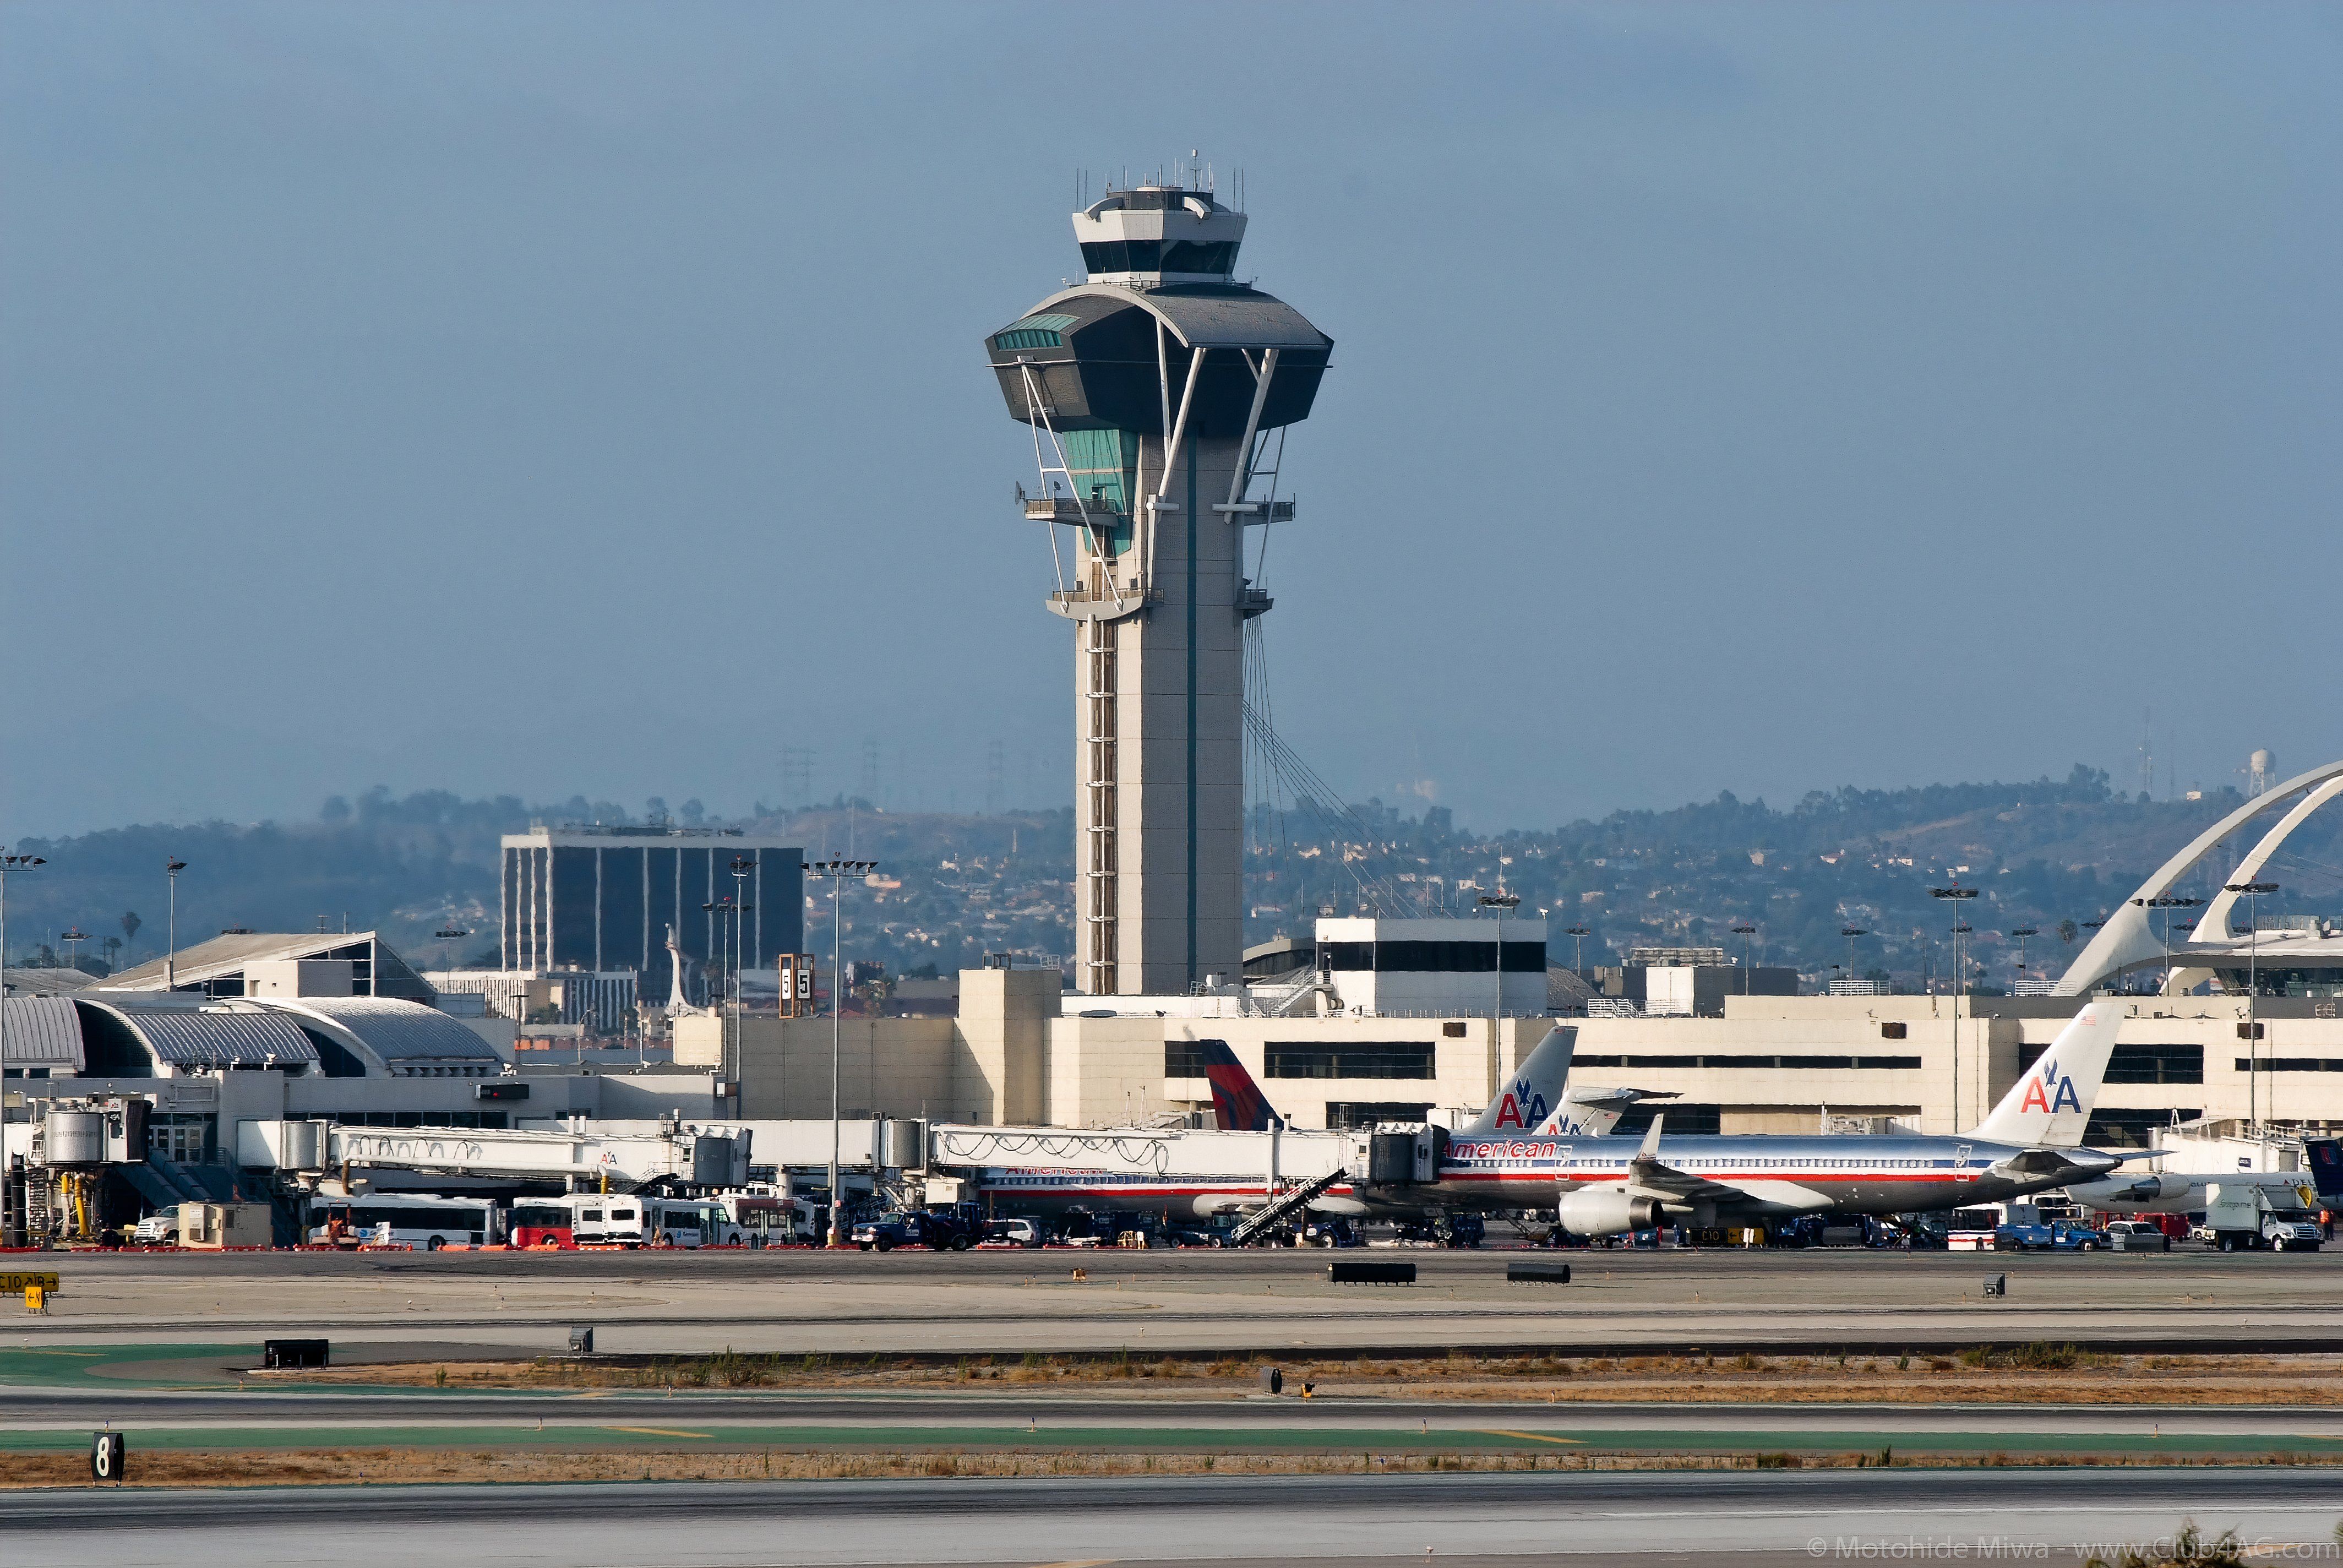 Control_tower_at_LAX_(6030868843)